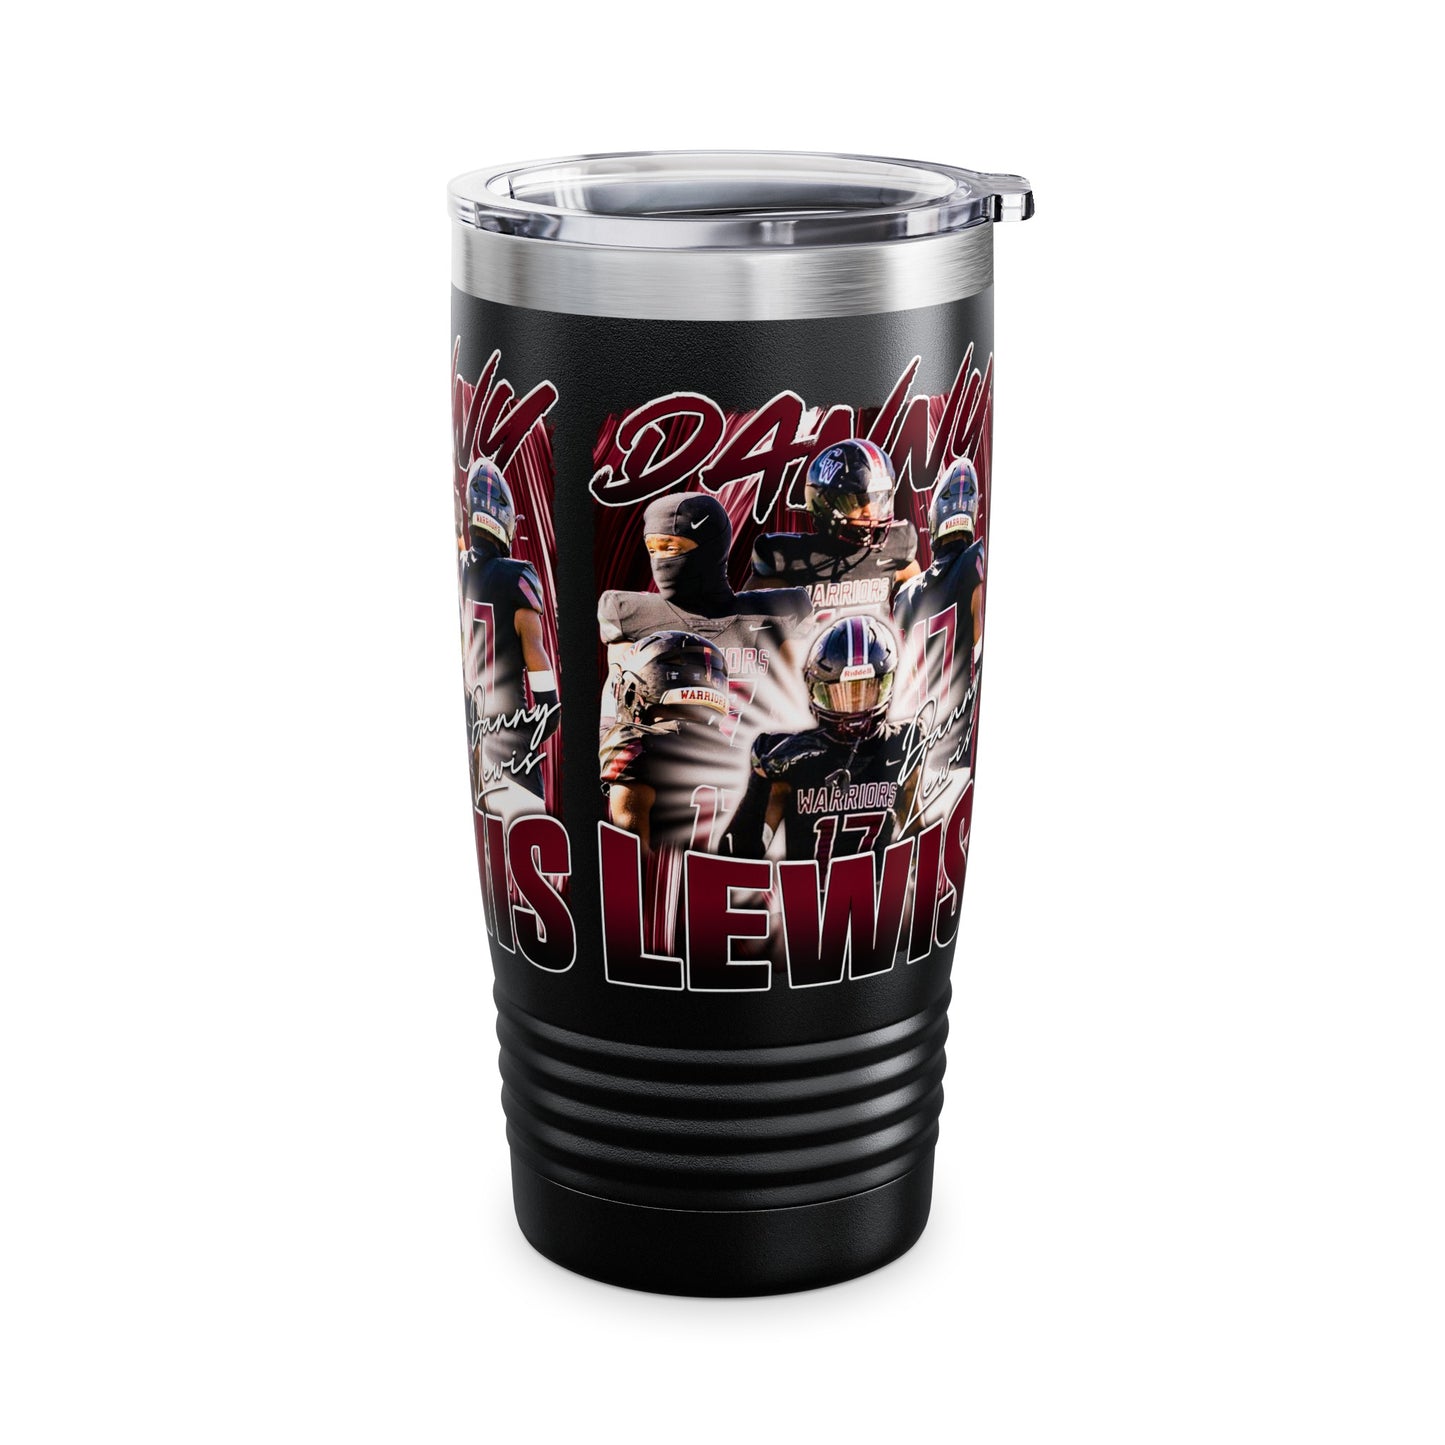 Danny Lewis Stainless Steal Tumbler